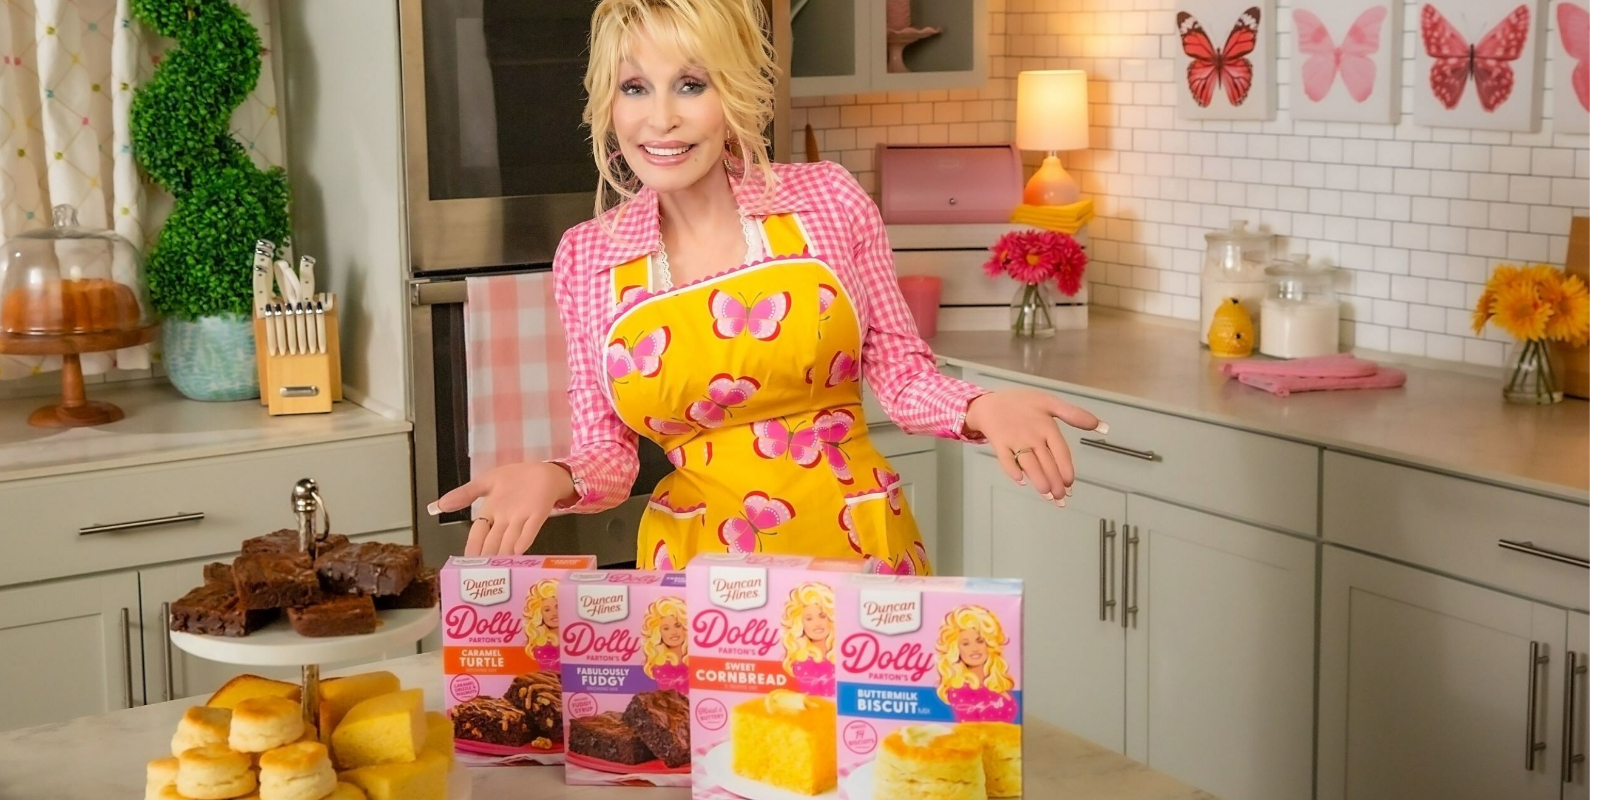 Dolly Parton poses with her newest lines of baking mixes in collaboration with Duncan Hines.